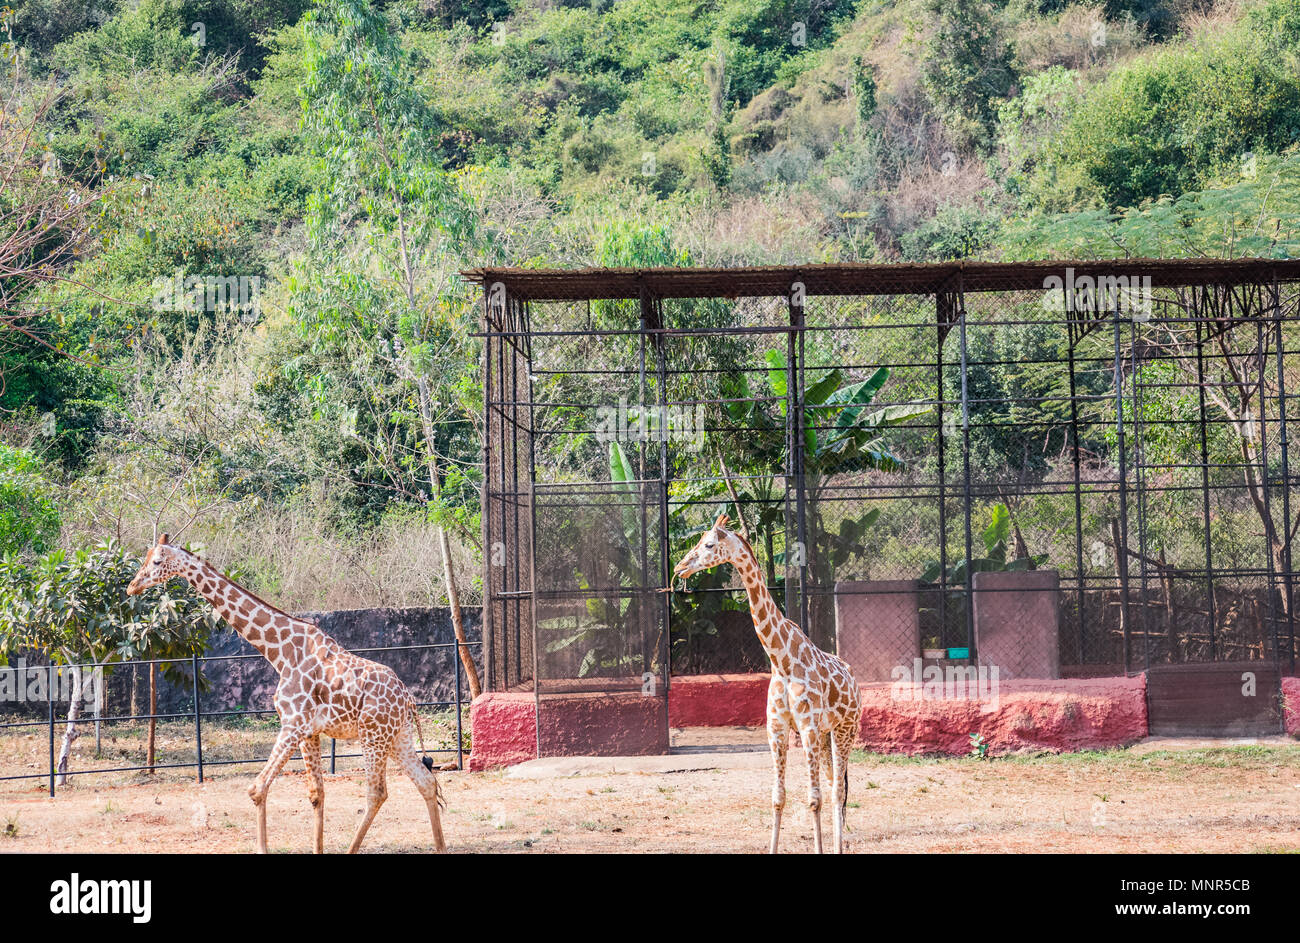 A couple of giraffe standing together in zoo & looking towards to visitors Stock Photo